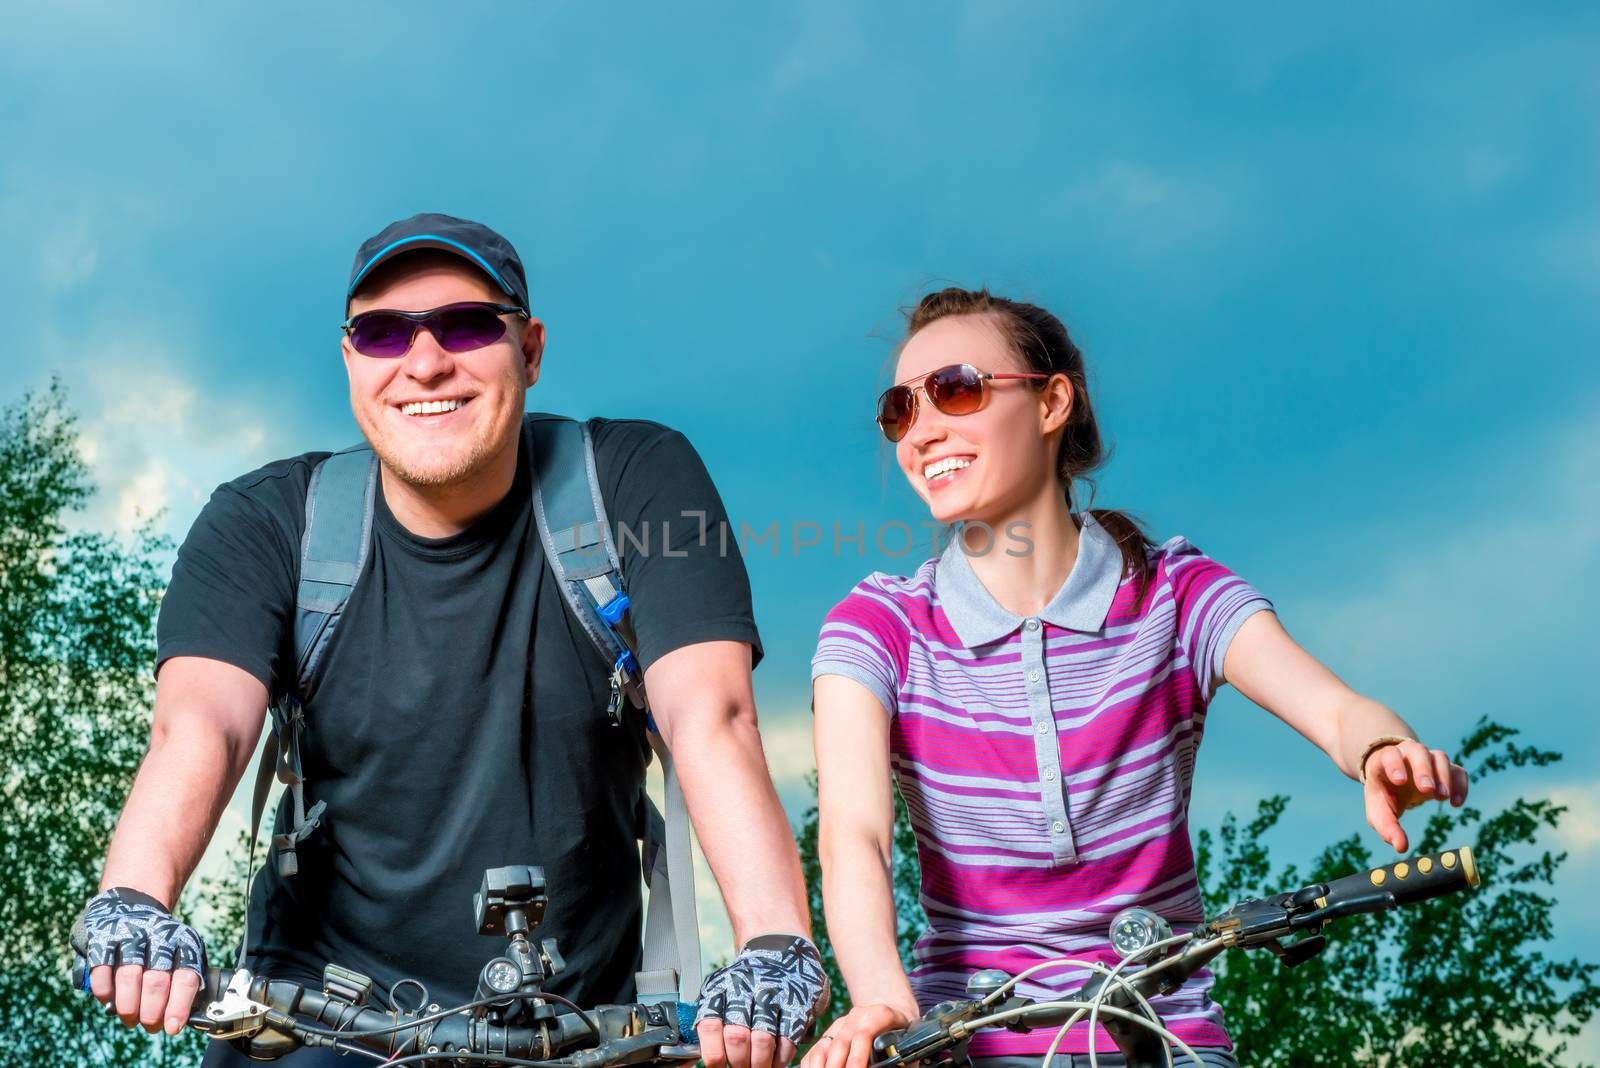 happy couple on the bike on the background of blue sky by kosmsos111